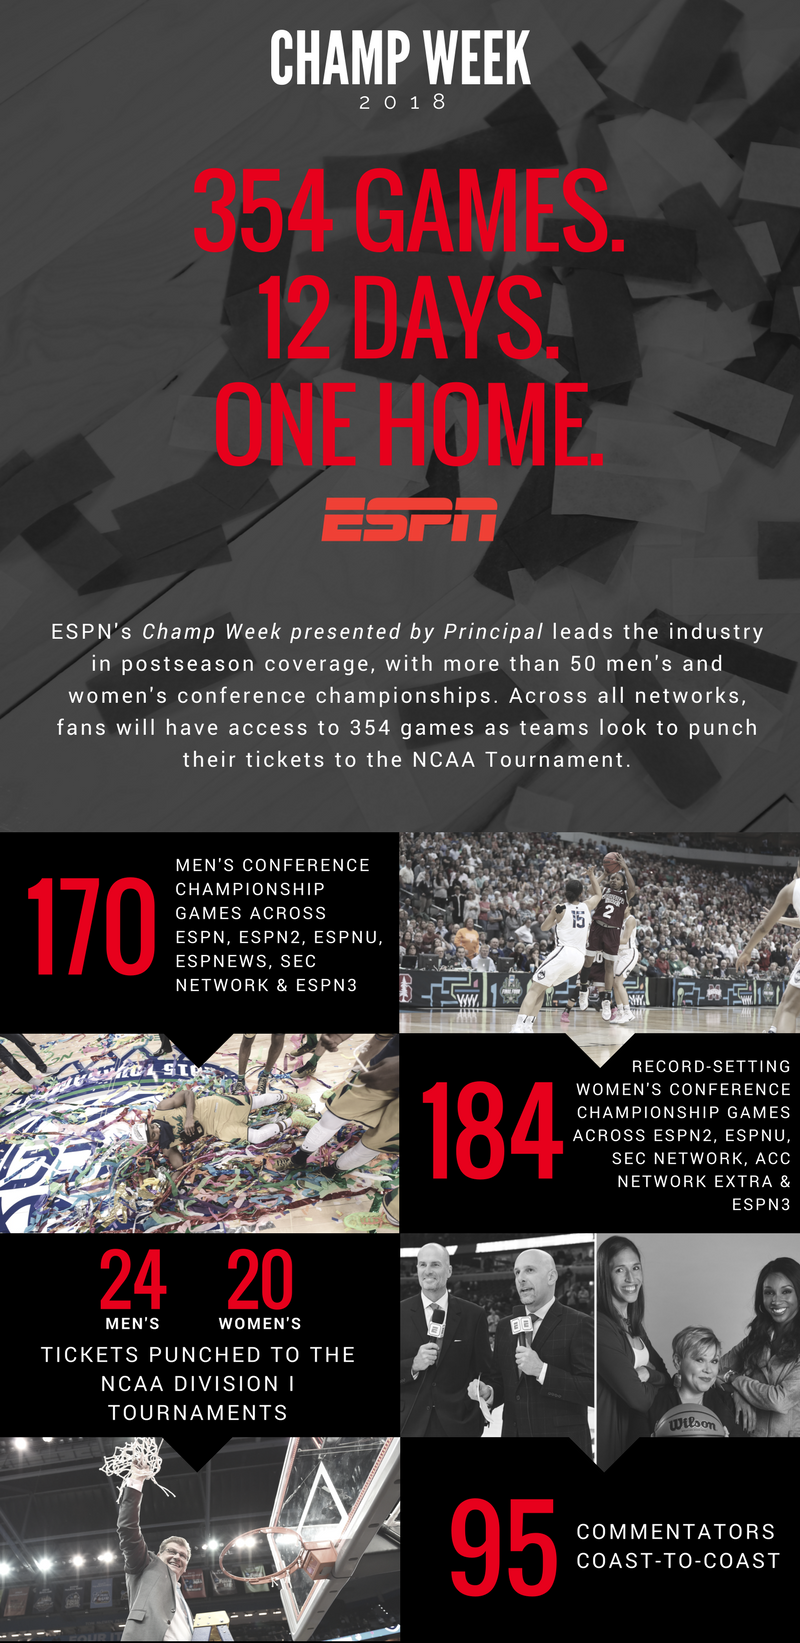 ESPN's Champ Week "By the Numbers" ESPN Front Row